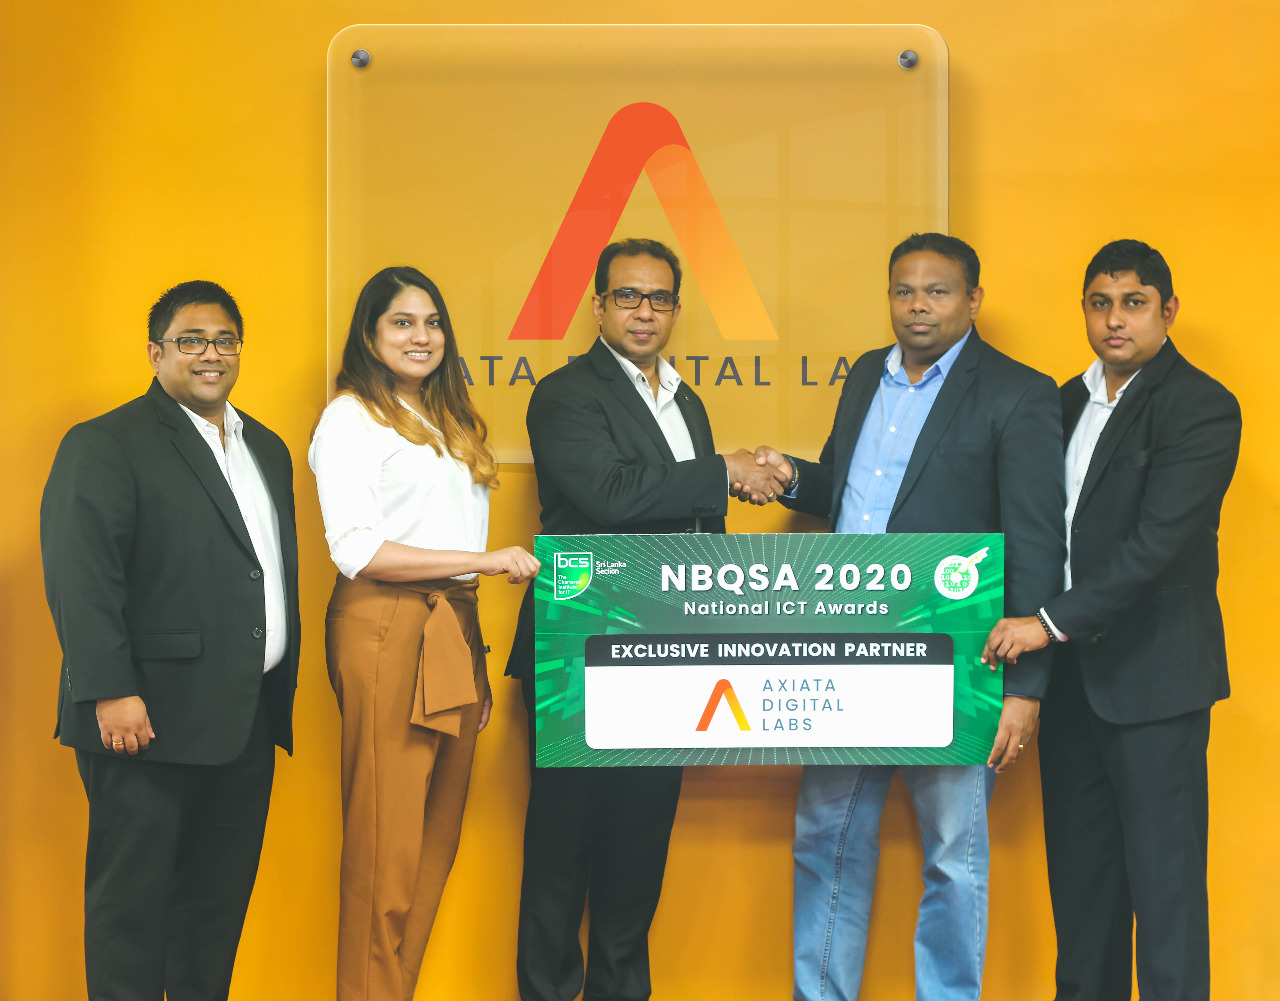 Axiata Digital Labs to support the National ICT Awards 2020 as the Exclusive Innovation Partner